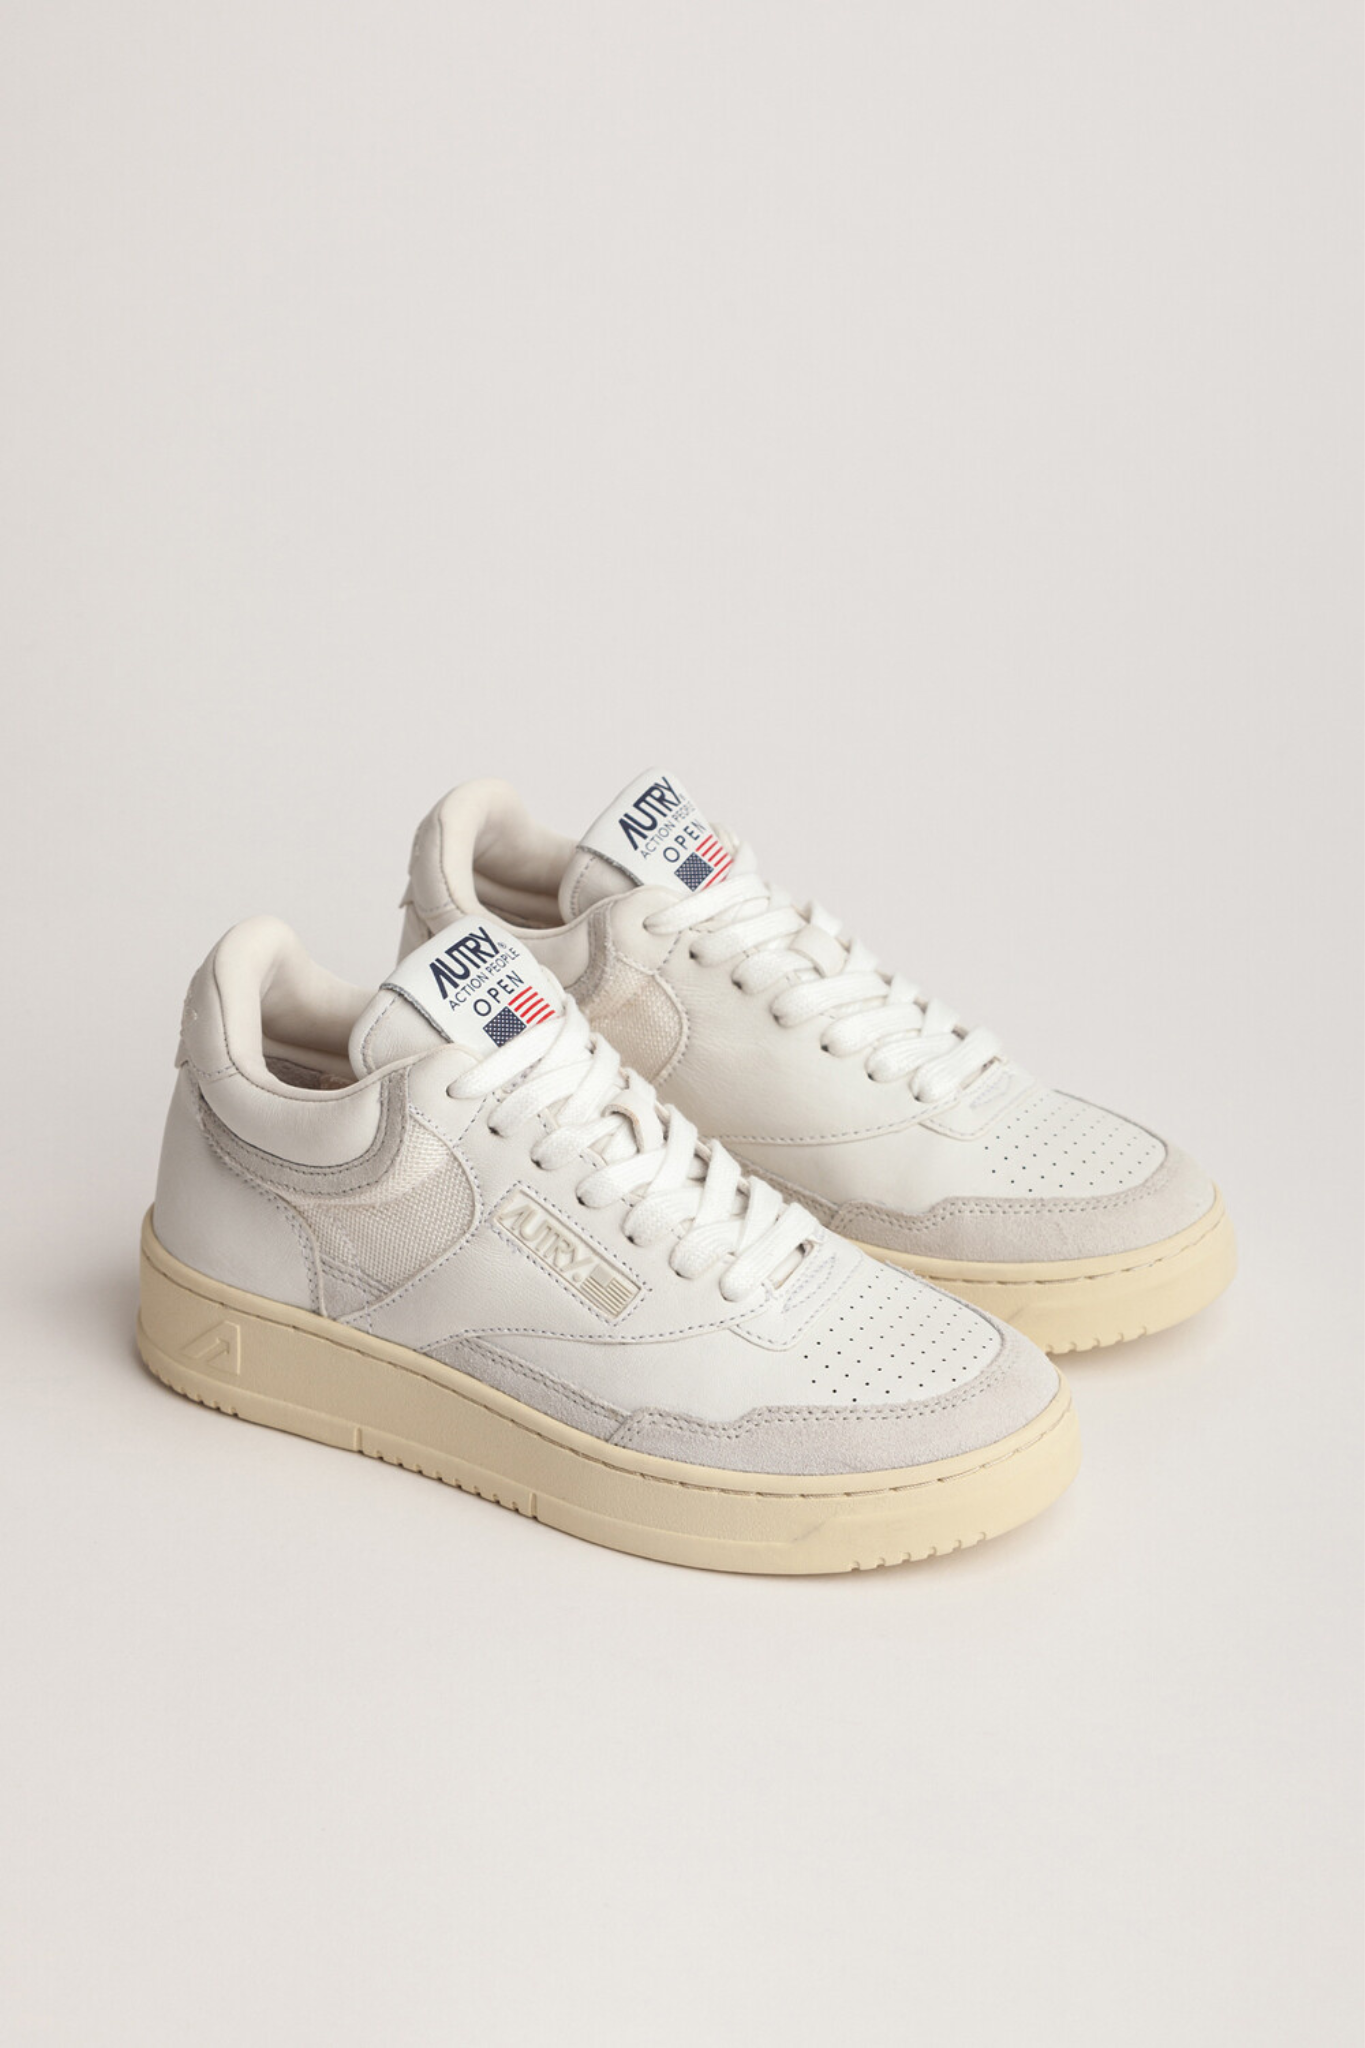 AOMW-CE11 - OPEN MID-TOP SNEAKERS IN LEATHER, MESH AND SUEDE COLOR WHITE